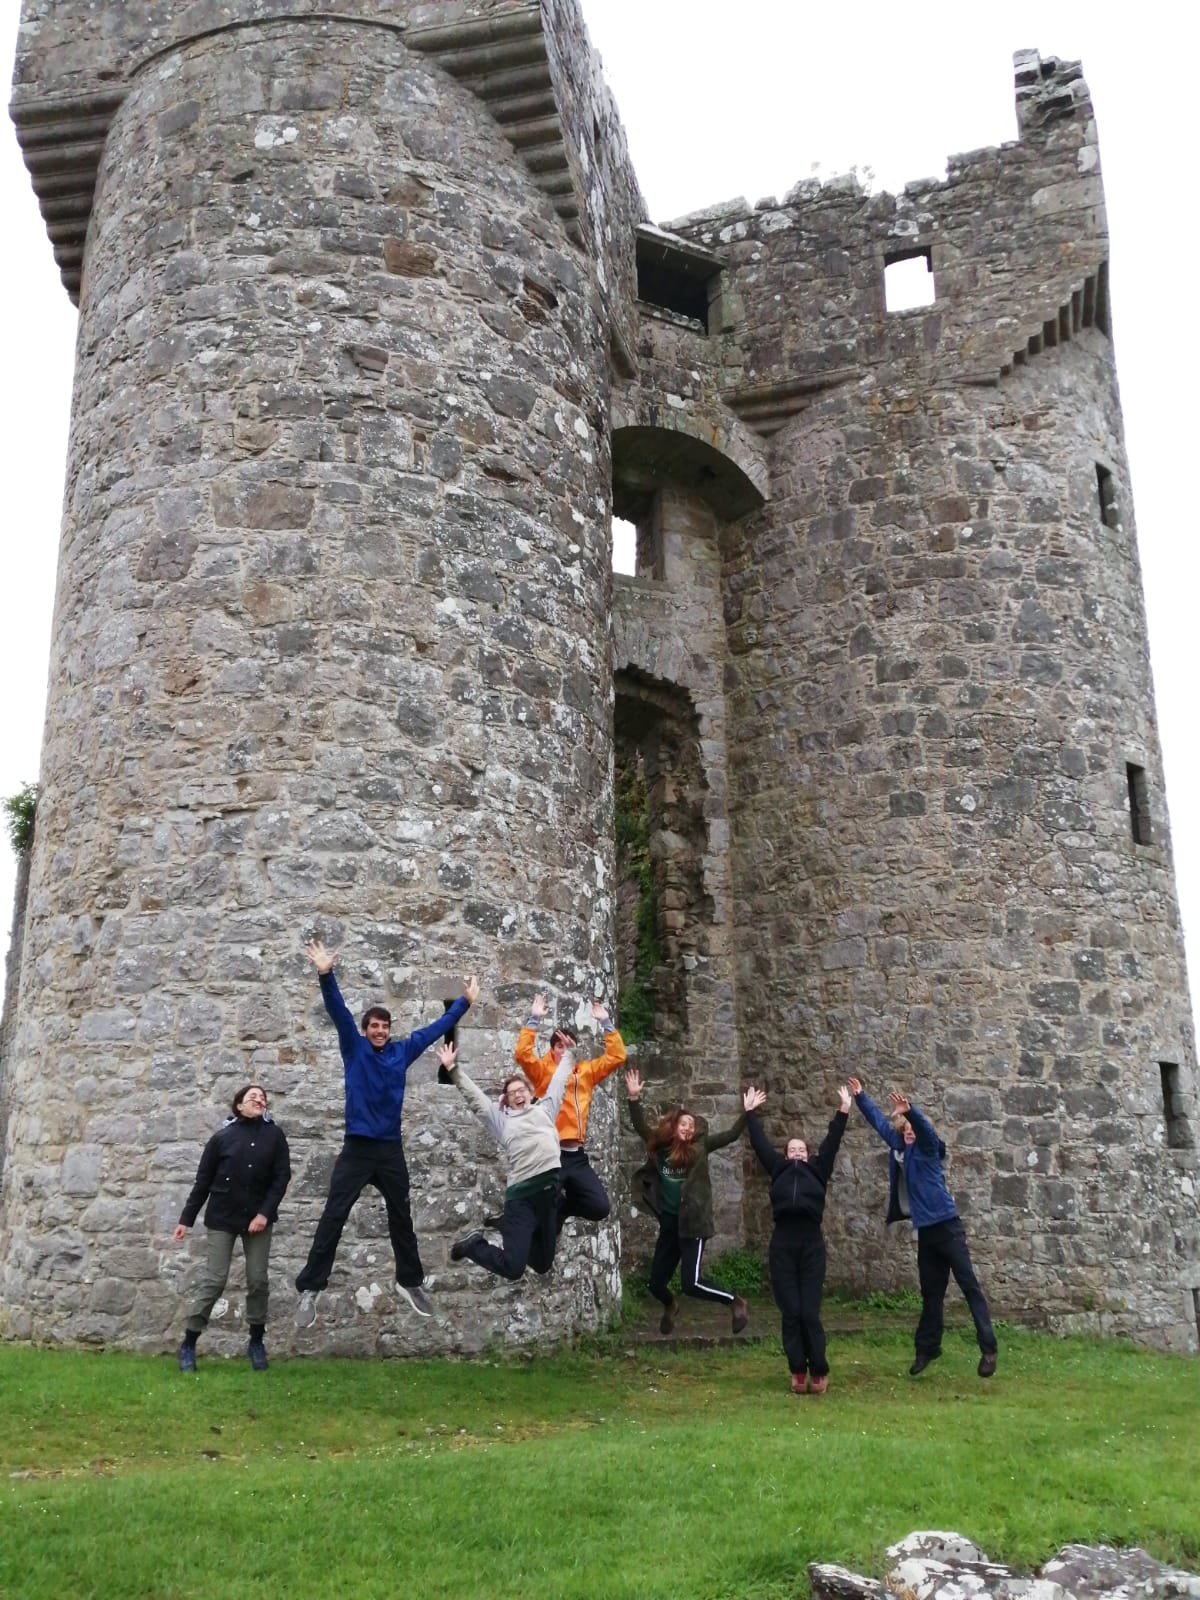 We love exploring and climbing around in castles!